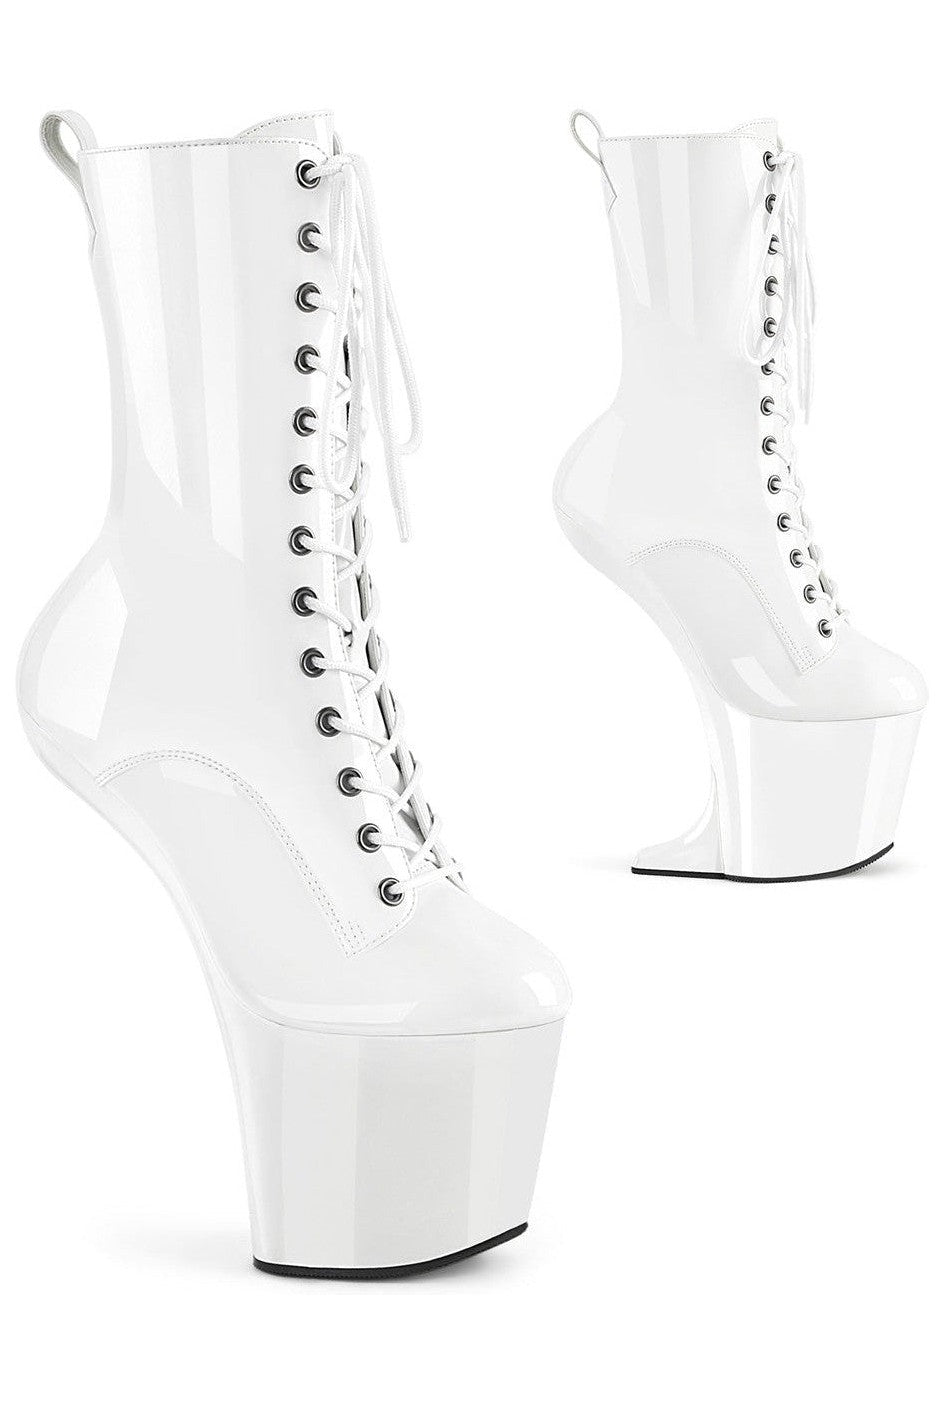 CRAZE-1040 White Patent Ankle Boot-Ankle Boots- Stripper Shoes at SEXYSHOES.COM